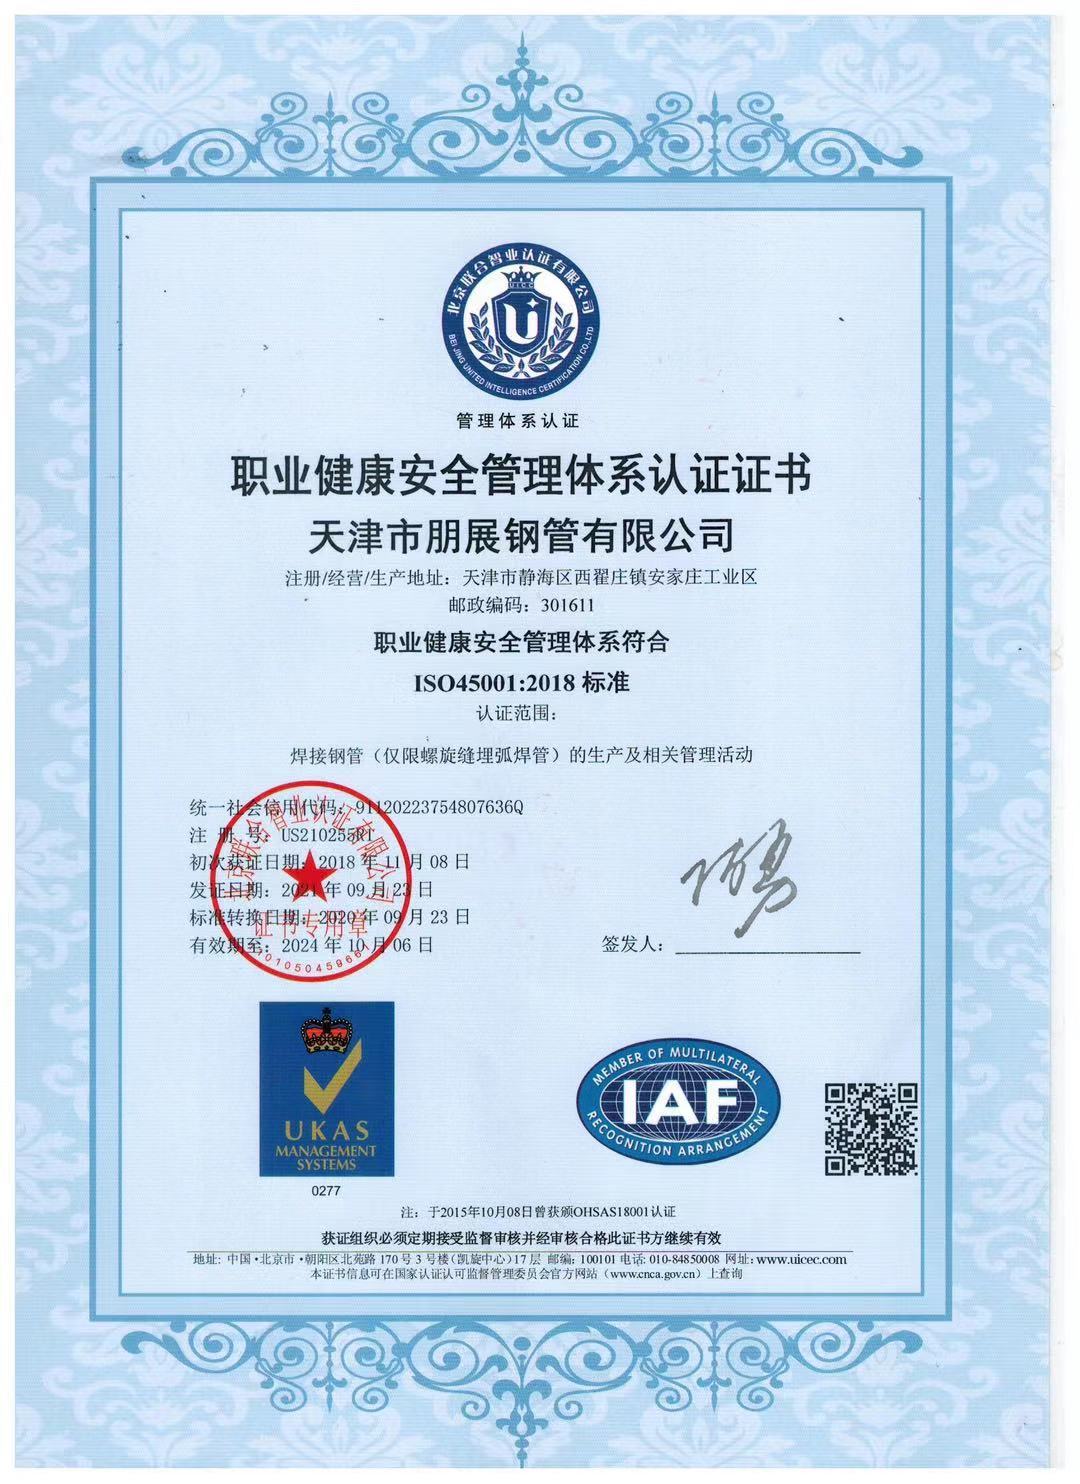 Occupational health management system certification